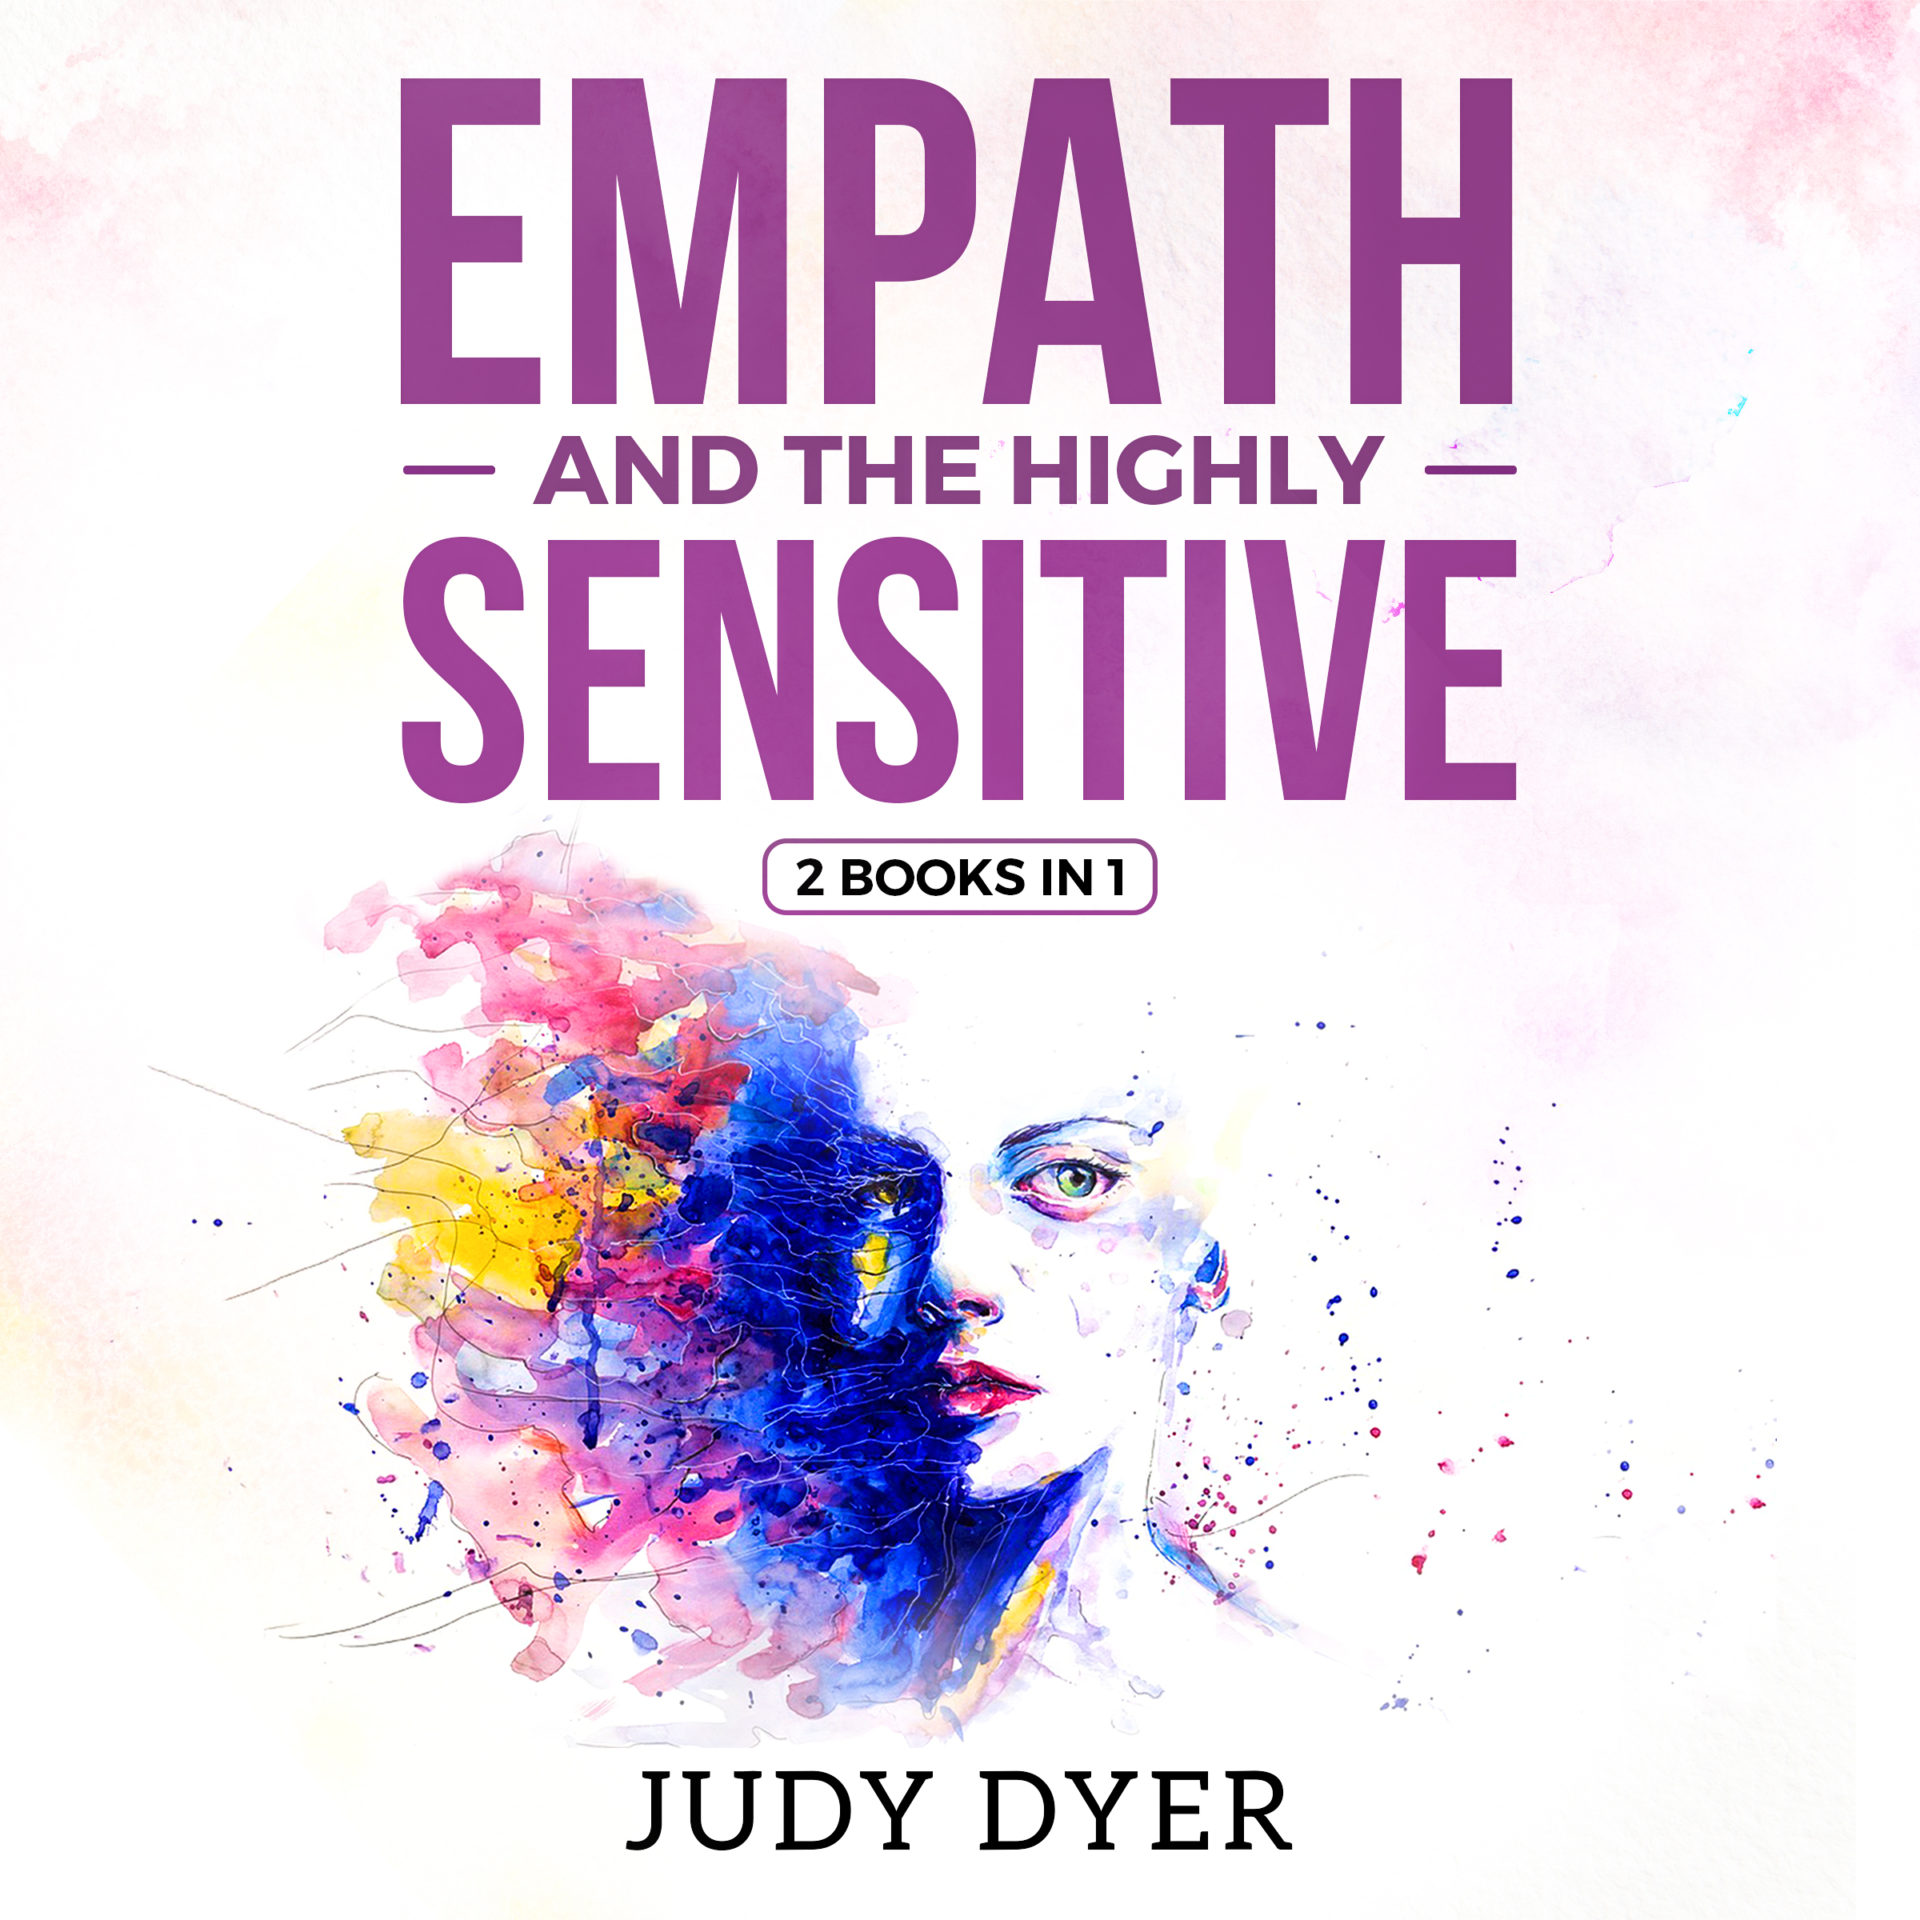 Empath and The Highly Sensitive Audiobook